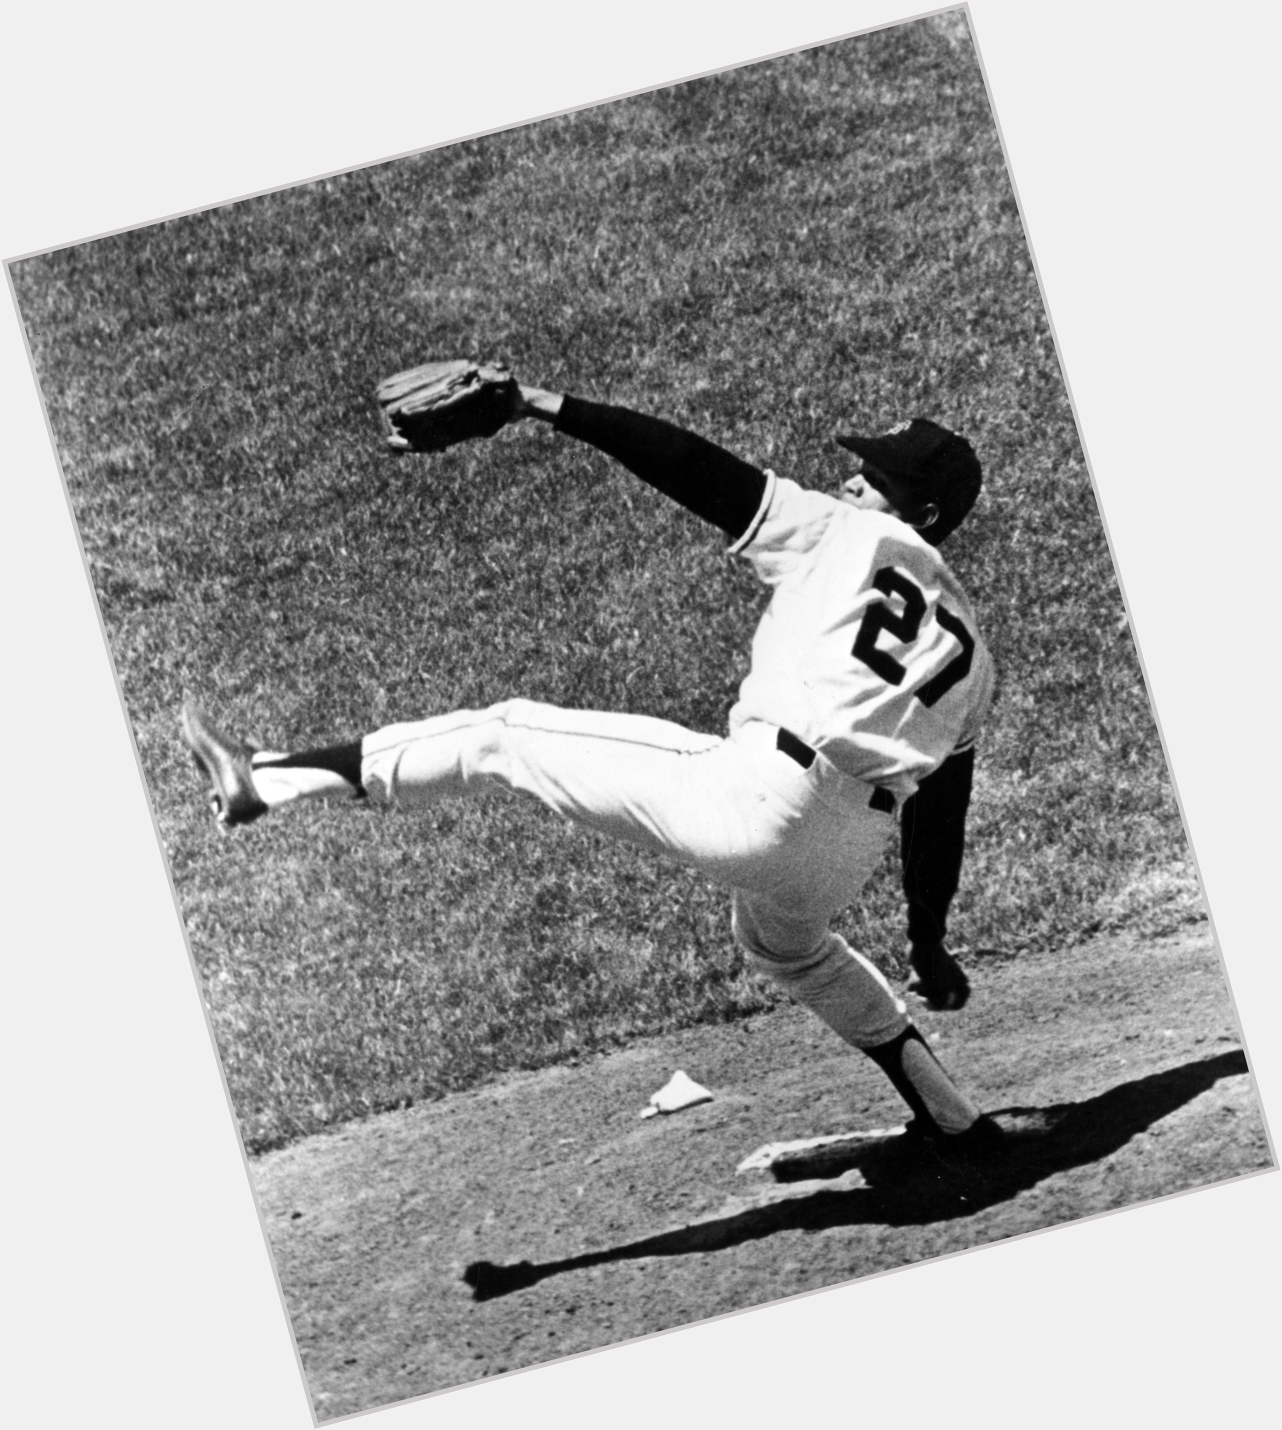 Crowding the plate was not allowed when this man was on the mound.
Happy Birthday Juan Marichal. 